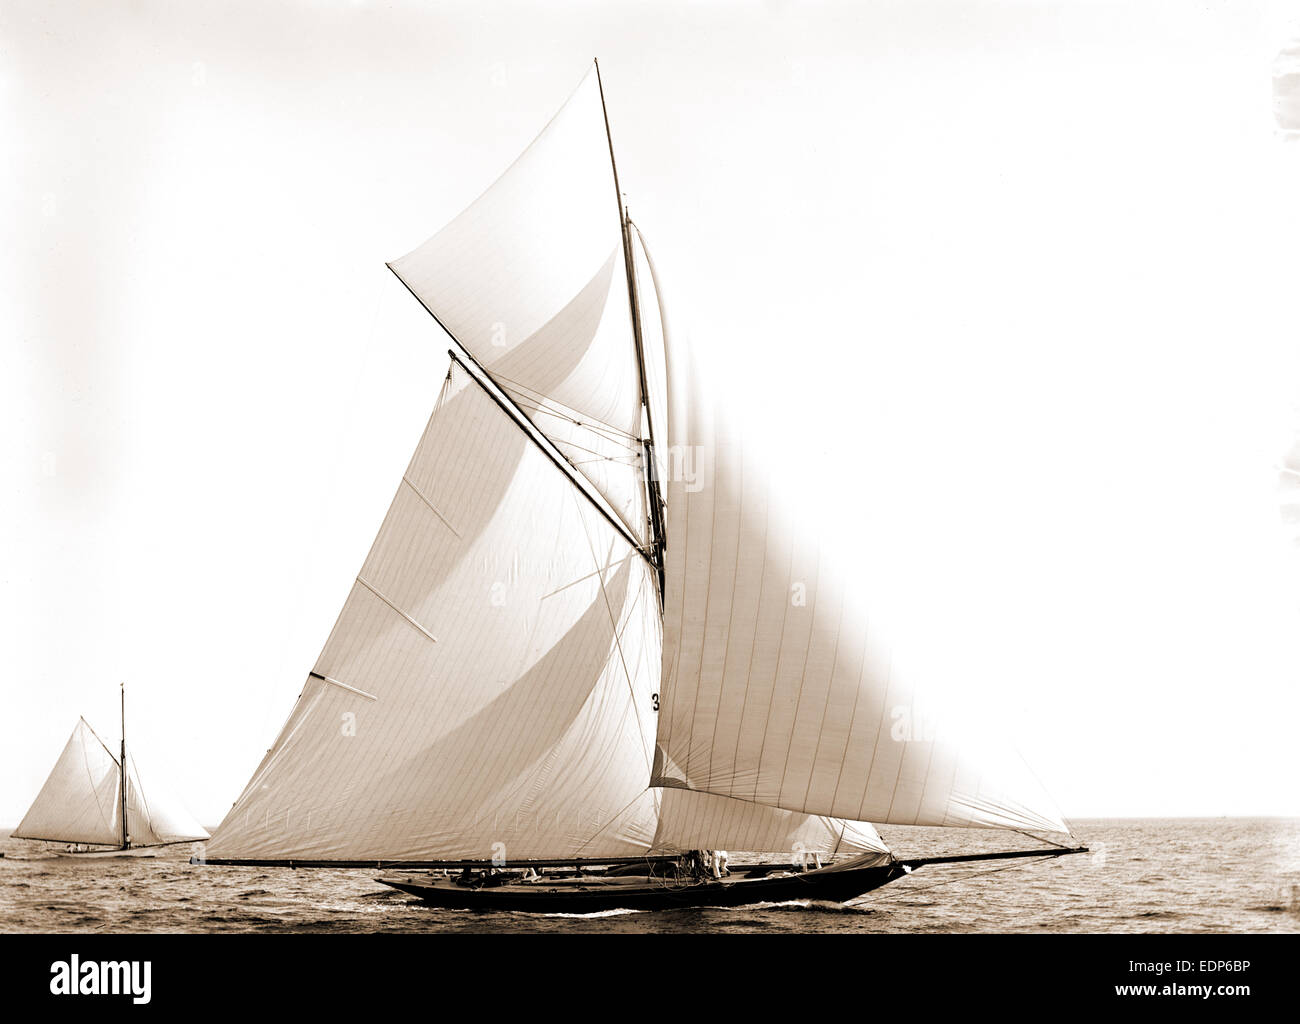 Wasp, Wasp (Sloop), Commodore Gerry Cup, régates, yachts, 1892 Banque D'Images